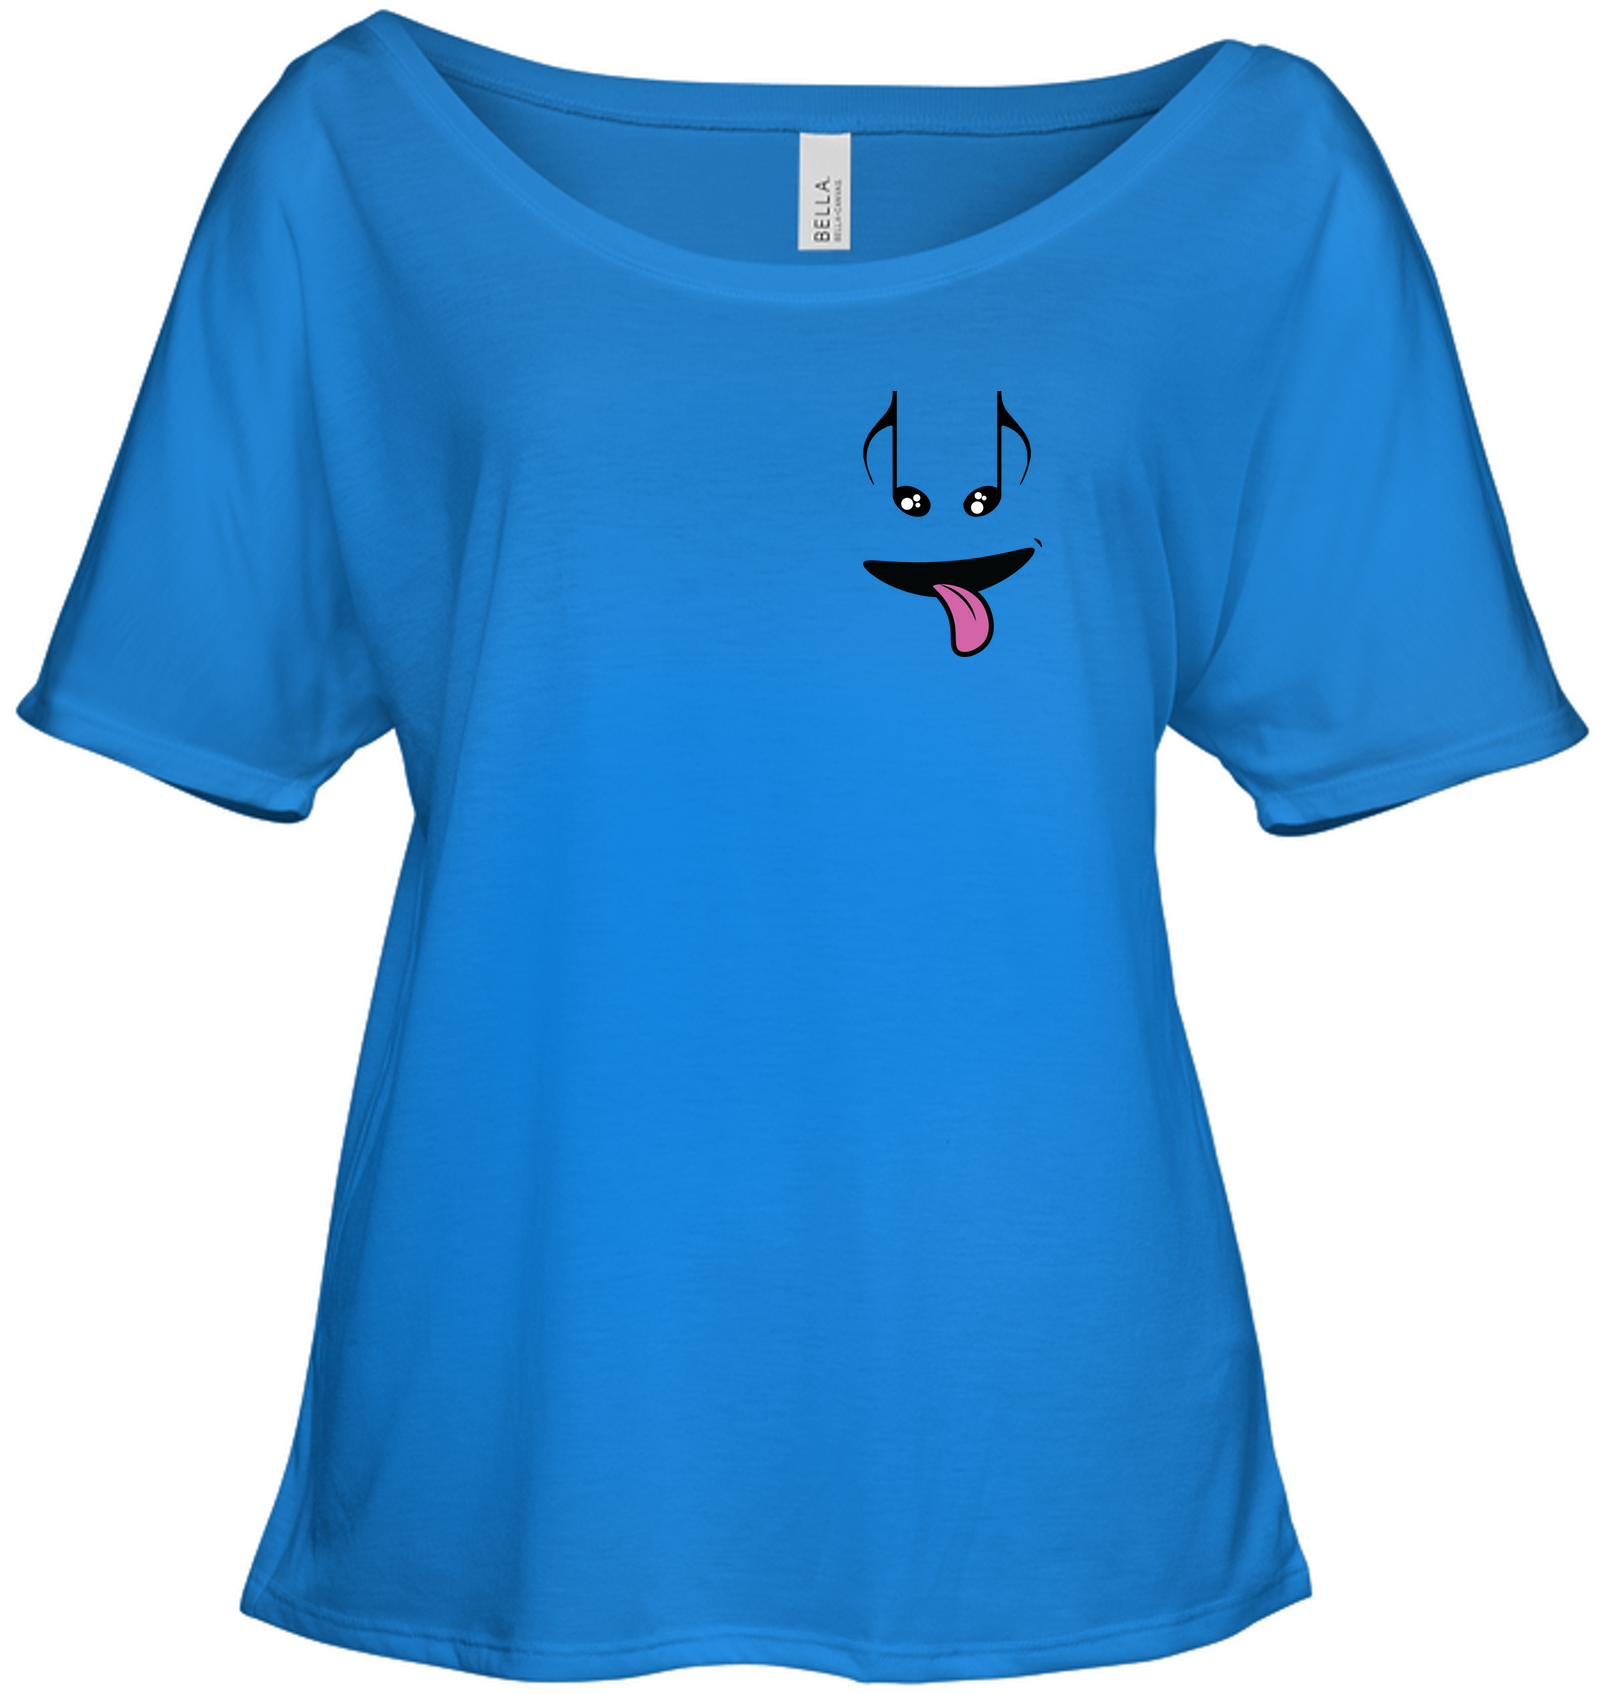 Silly Note Face (Pocket Size) - Bella + Canvas Women's Slouchy Tee